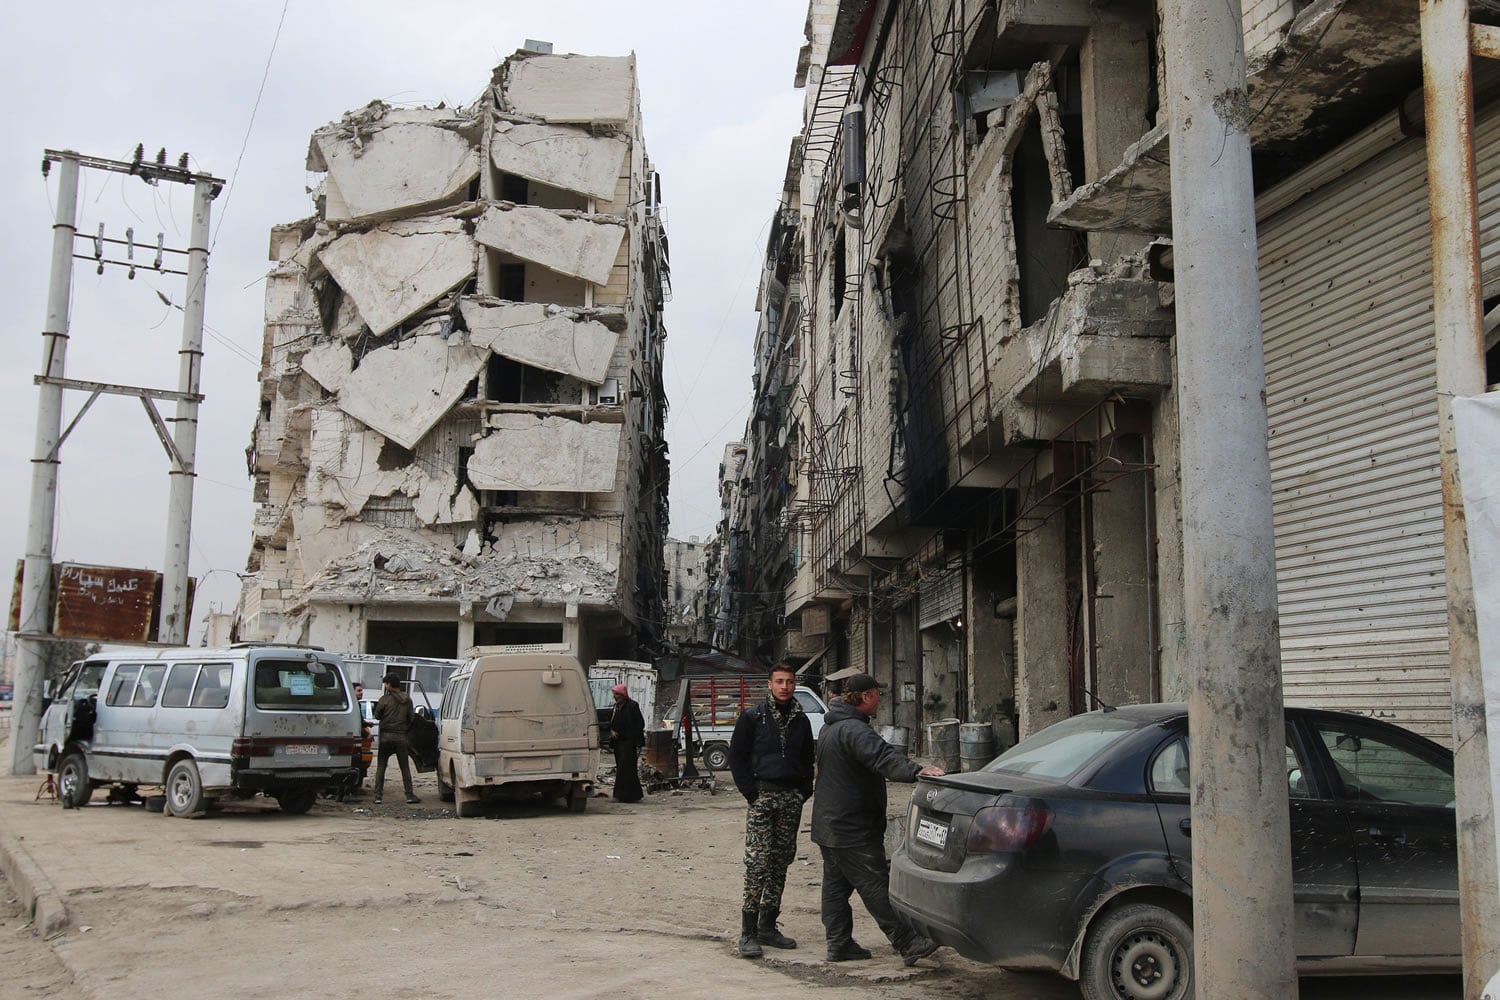 In this Thursday, Feb. 11, 2016 photo, a building is seen with heavy damage in Aleppo, Syria. The fighting around Syria's largest city of Aleppo has brought government forces closer to the Turkish border than at any point in recent years, routing rebels from key areas and creating a humanitarian disaster as tens of thousands of people flee.